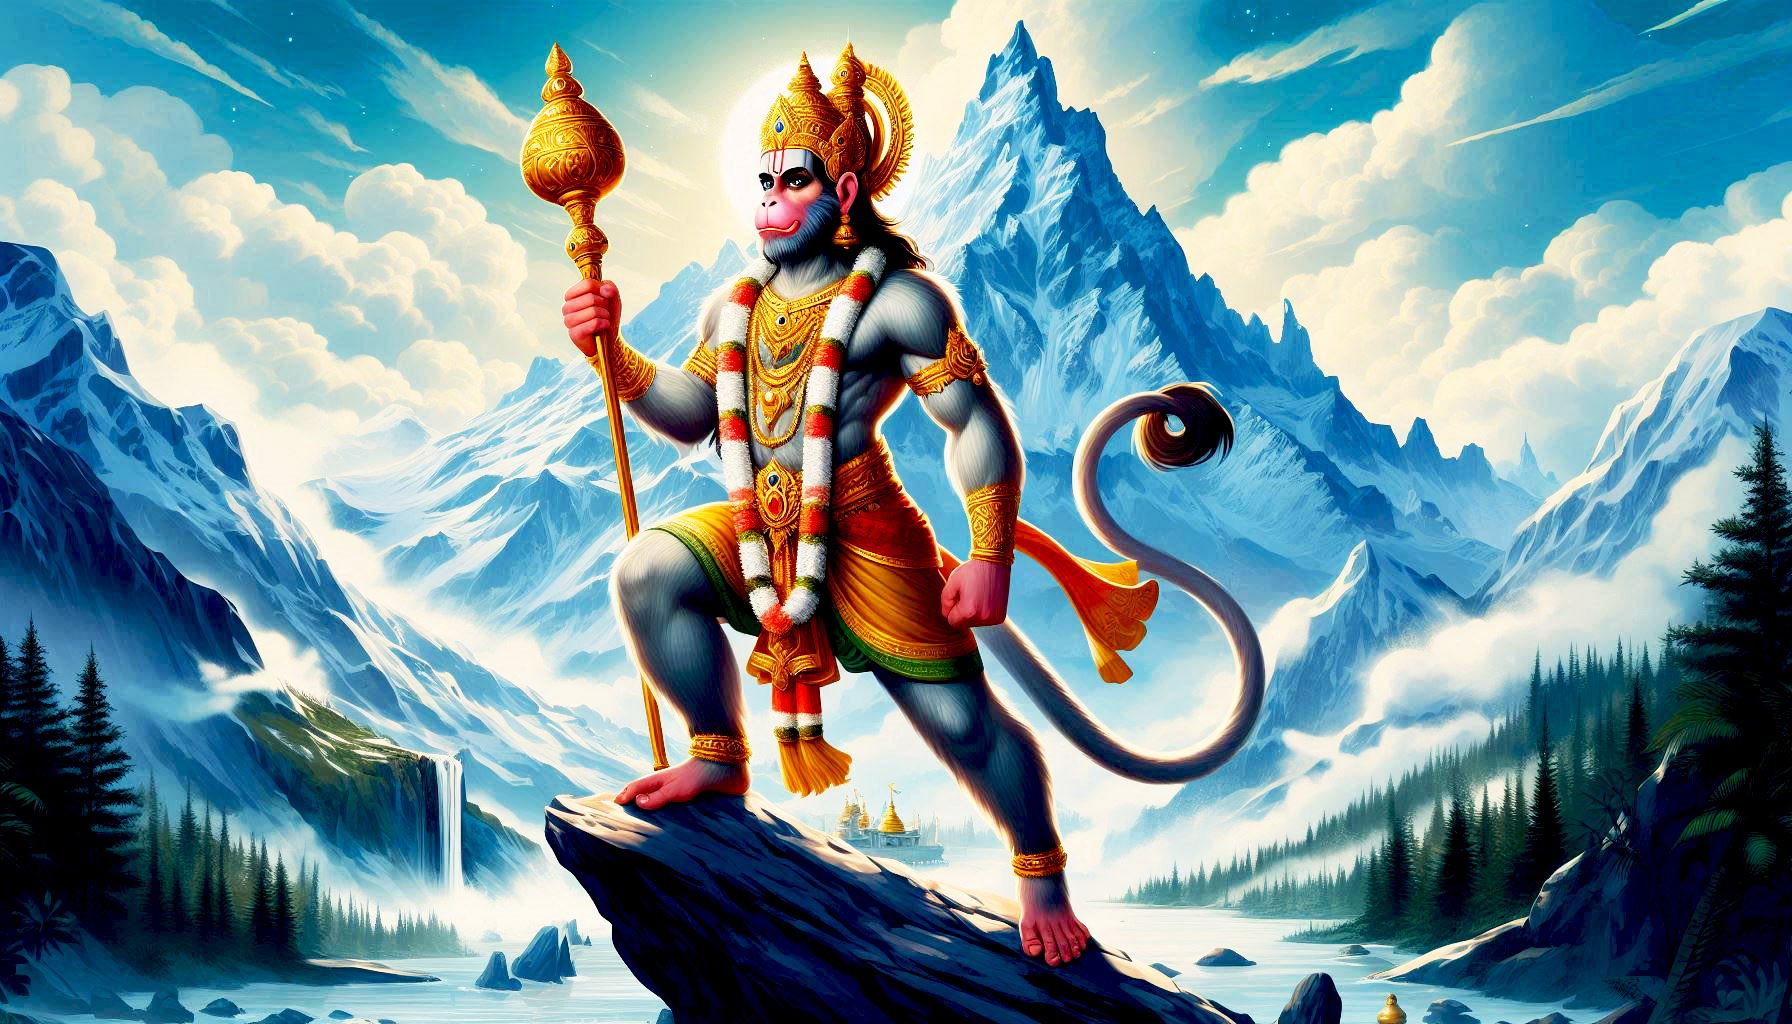 Download Free Majestic Jay Hanuman Amidst Snowy Mountains and Cloud for websites, slideshows, and designs | royalty-free and unlimited use.